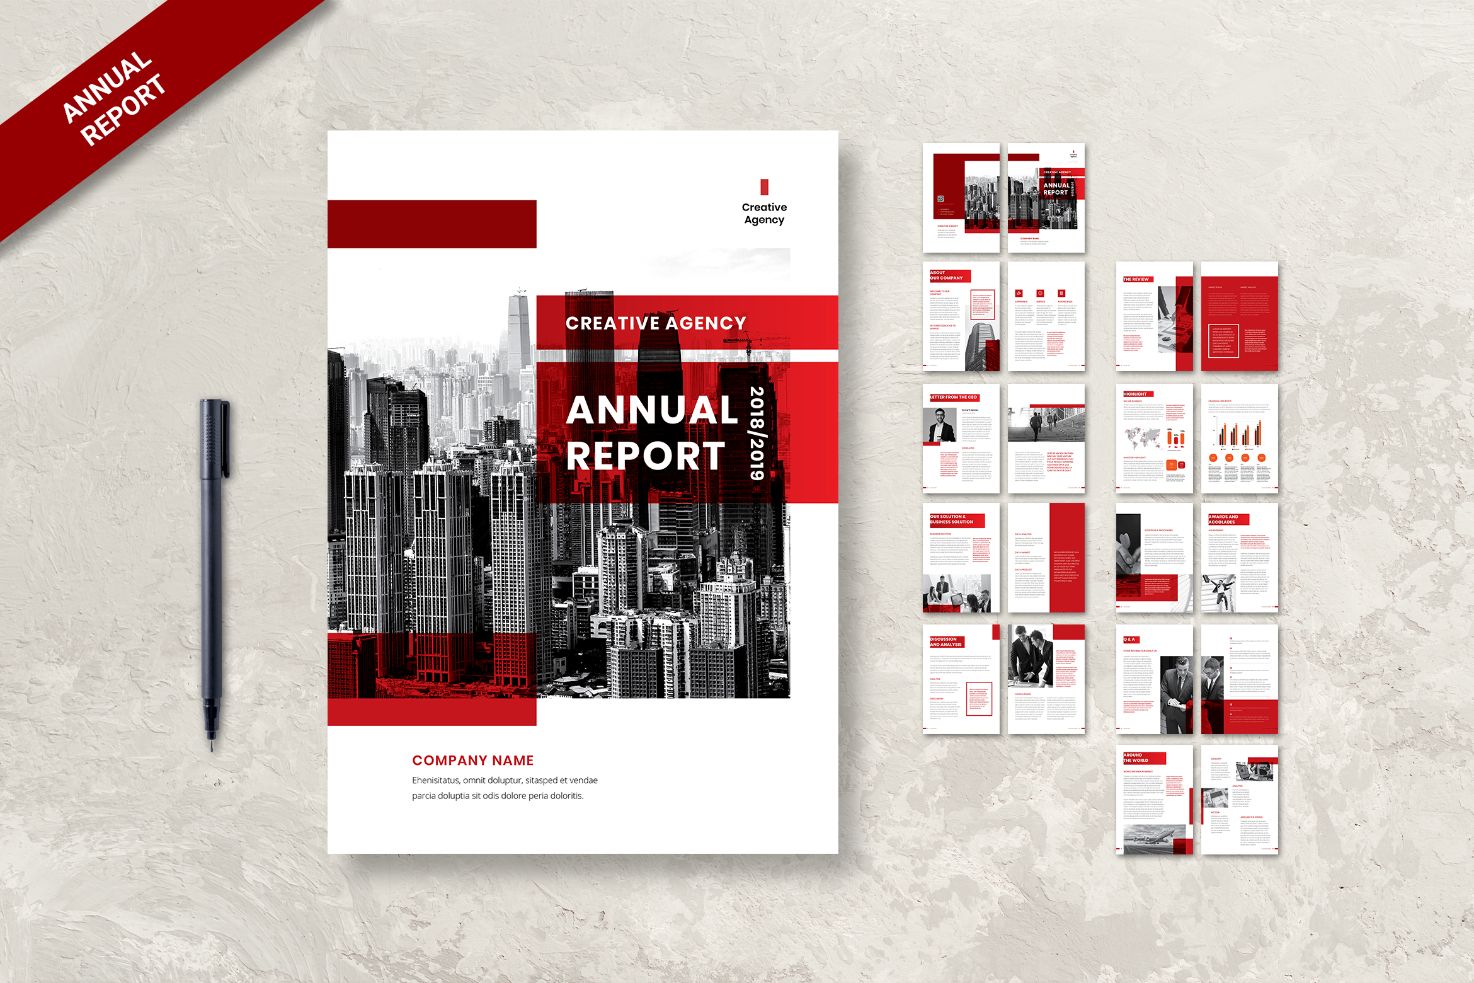 Best Annual Report Template Designs -Red and White Theme With Transparent Overlays